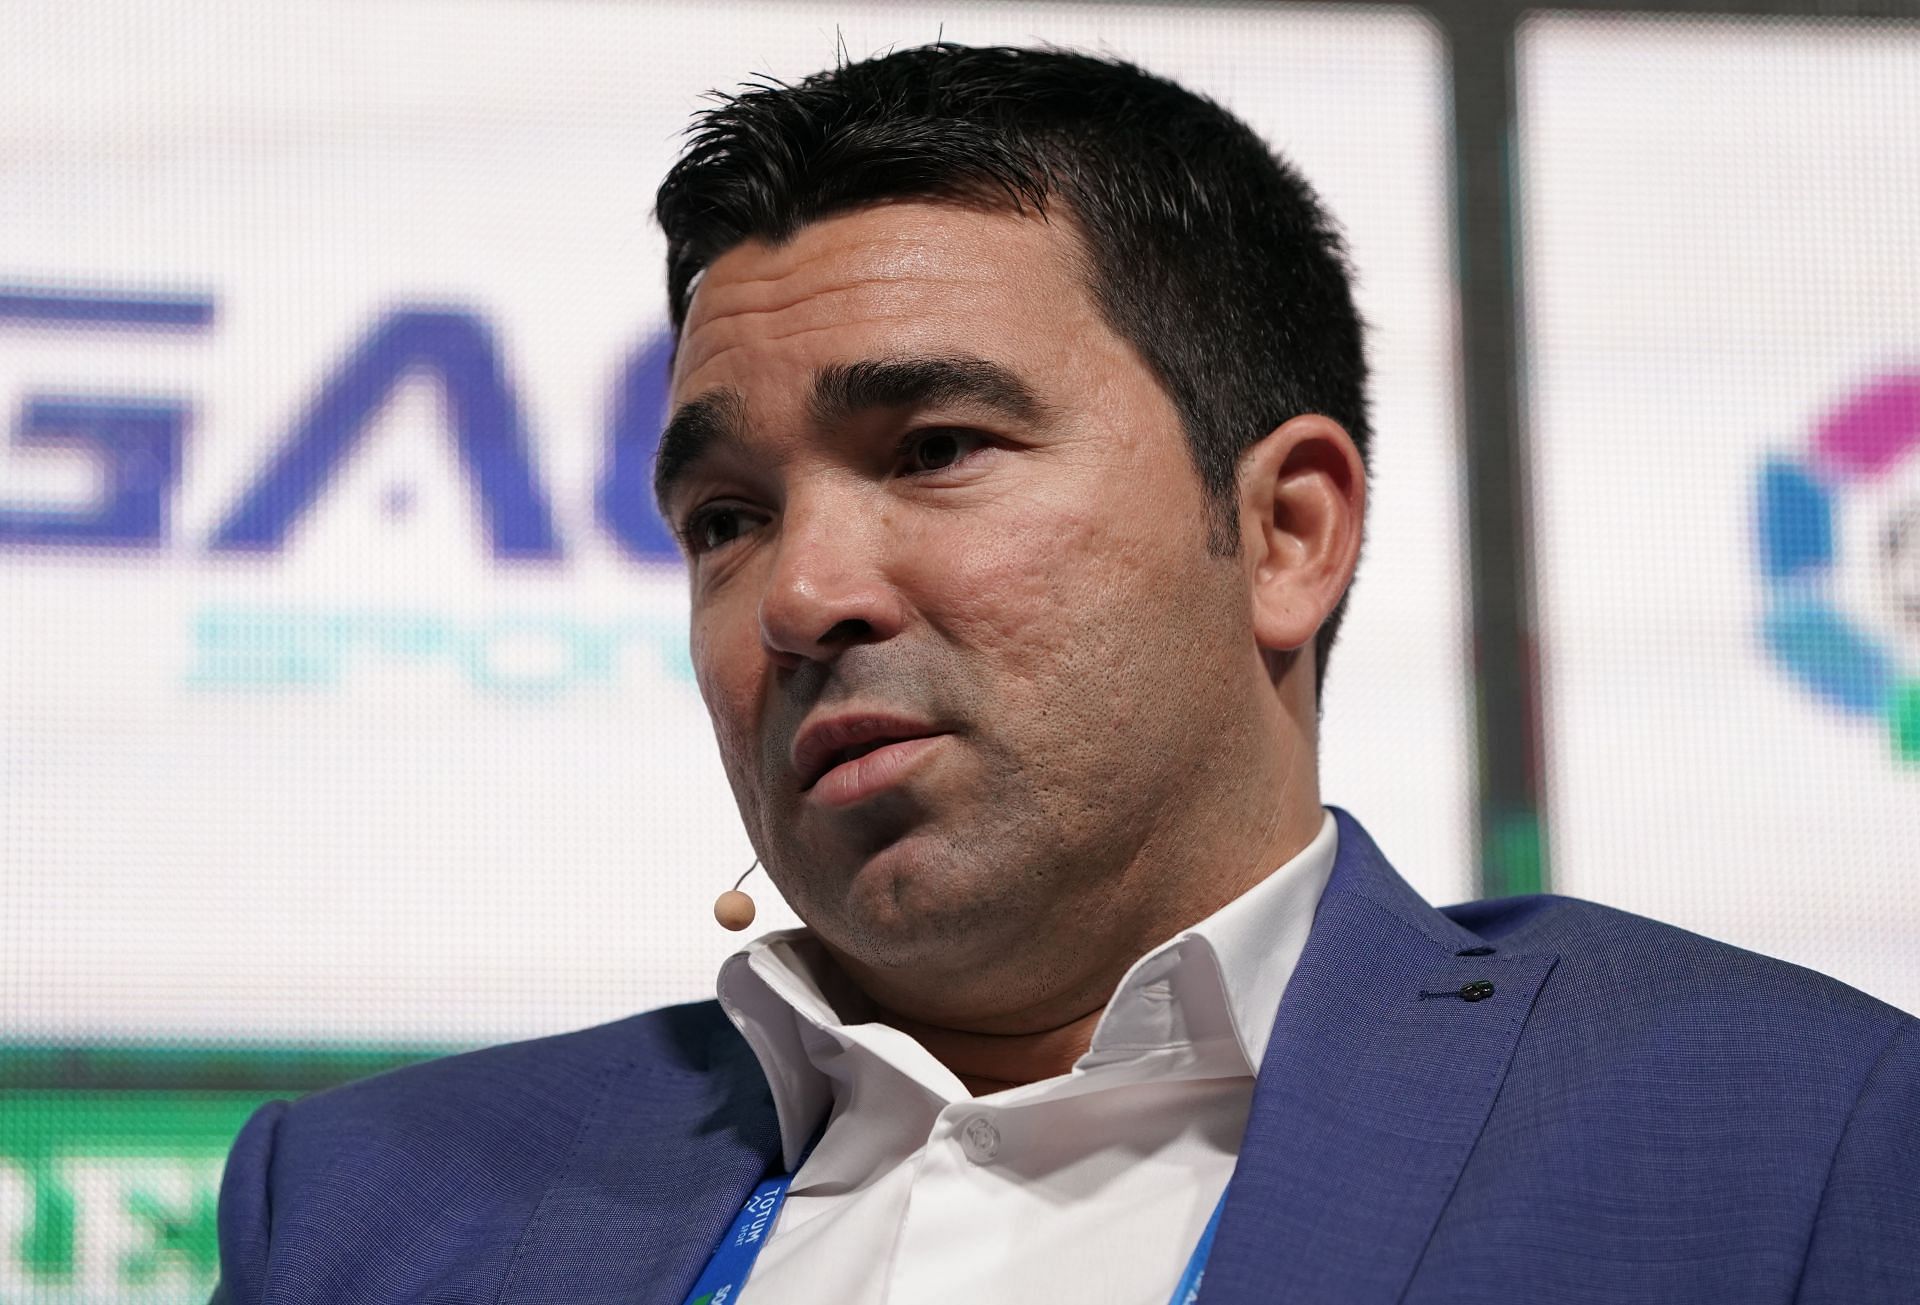 Legendary Portugal player Deco during the Soccerex Europe - Day 1